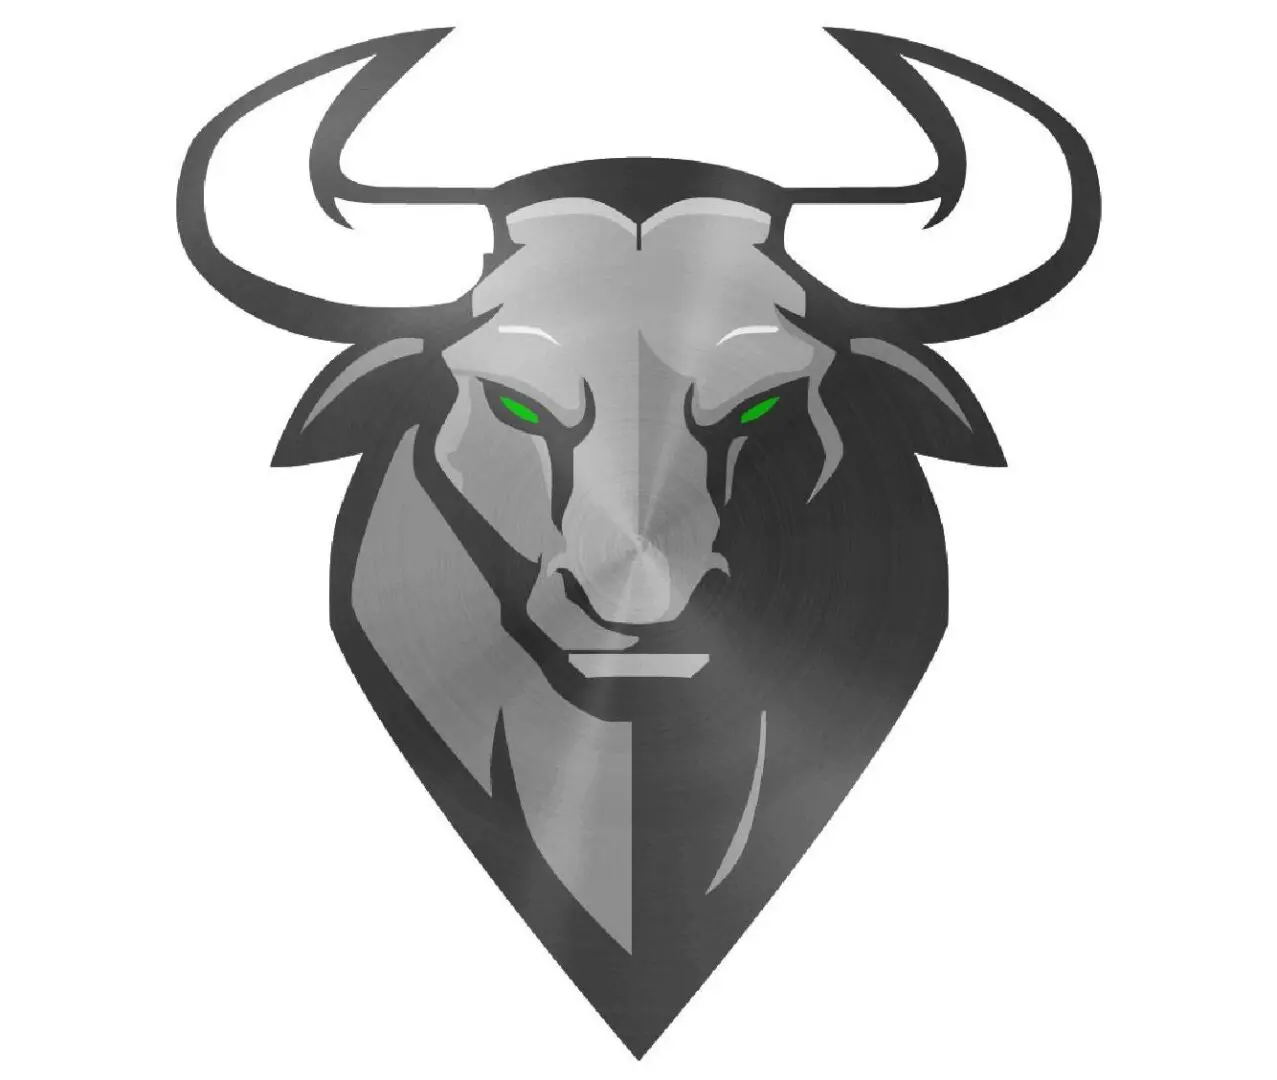 A bull with horns and green eyes.